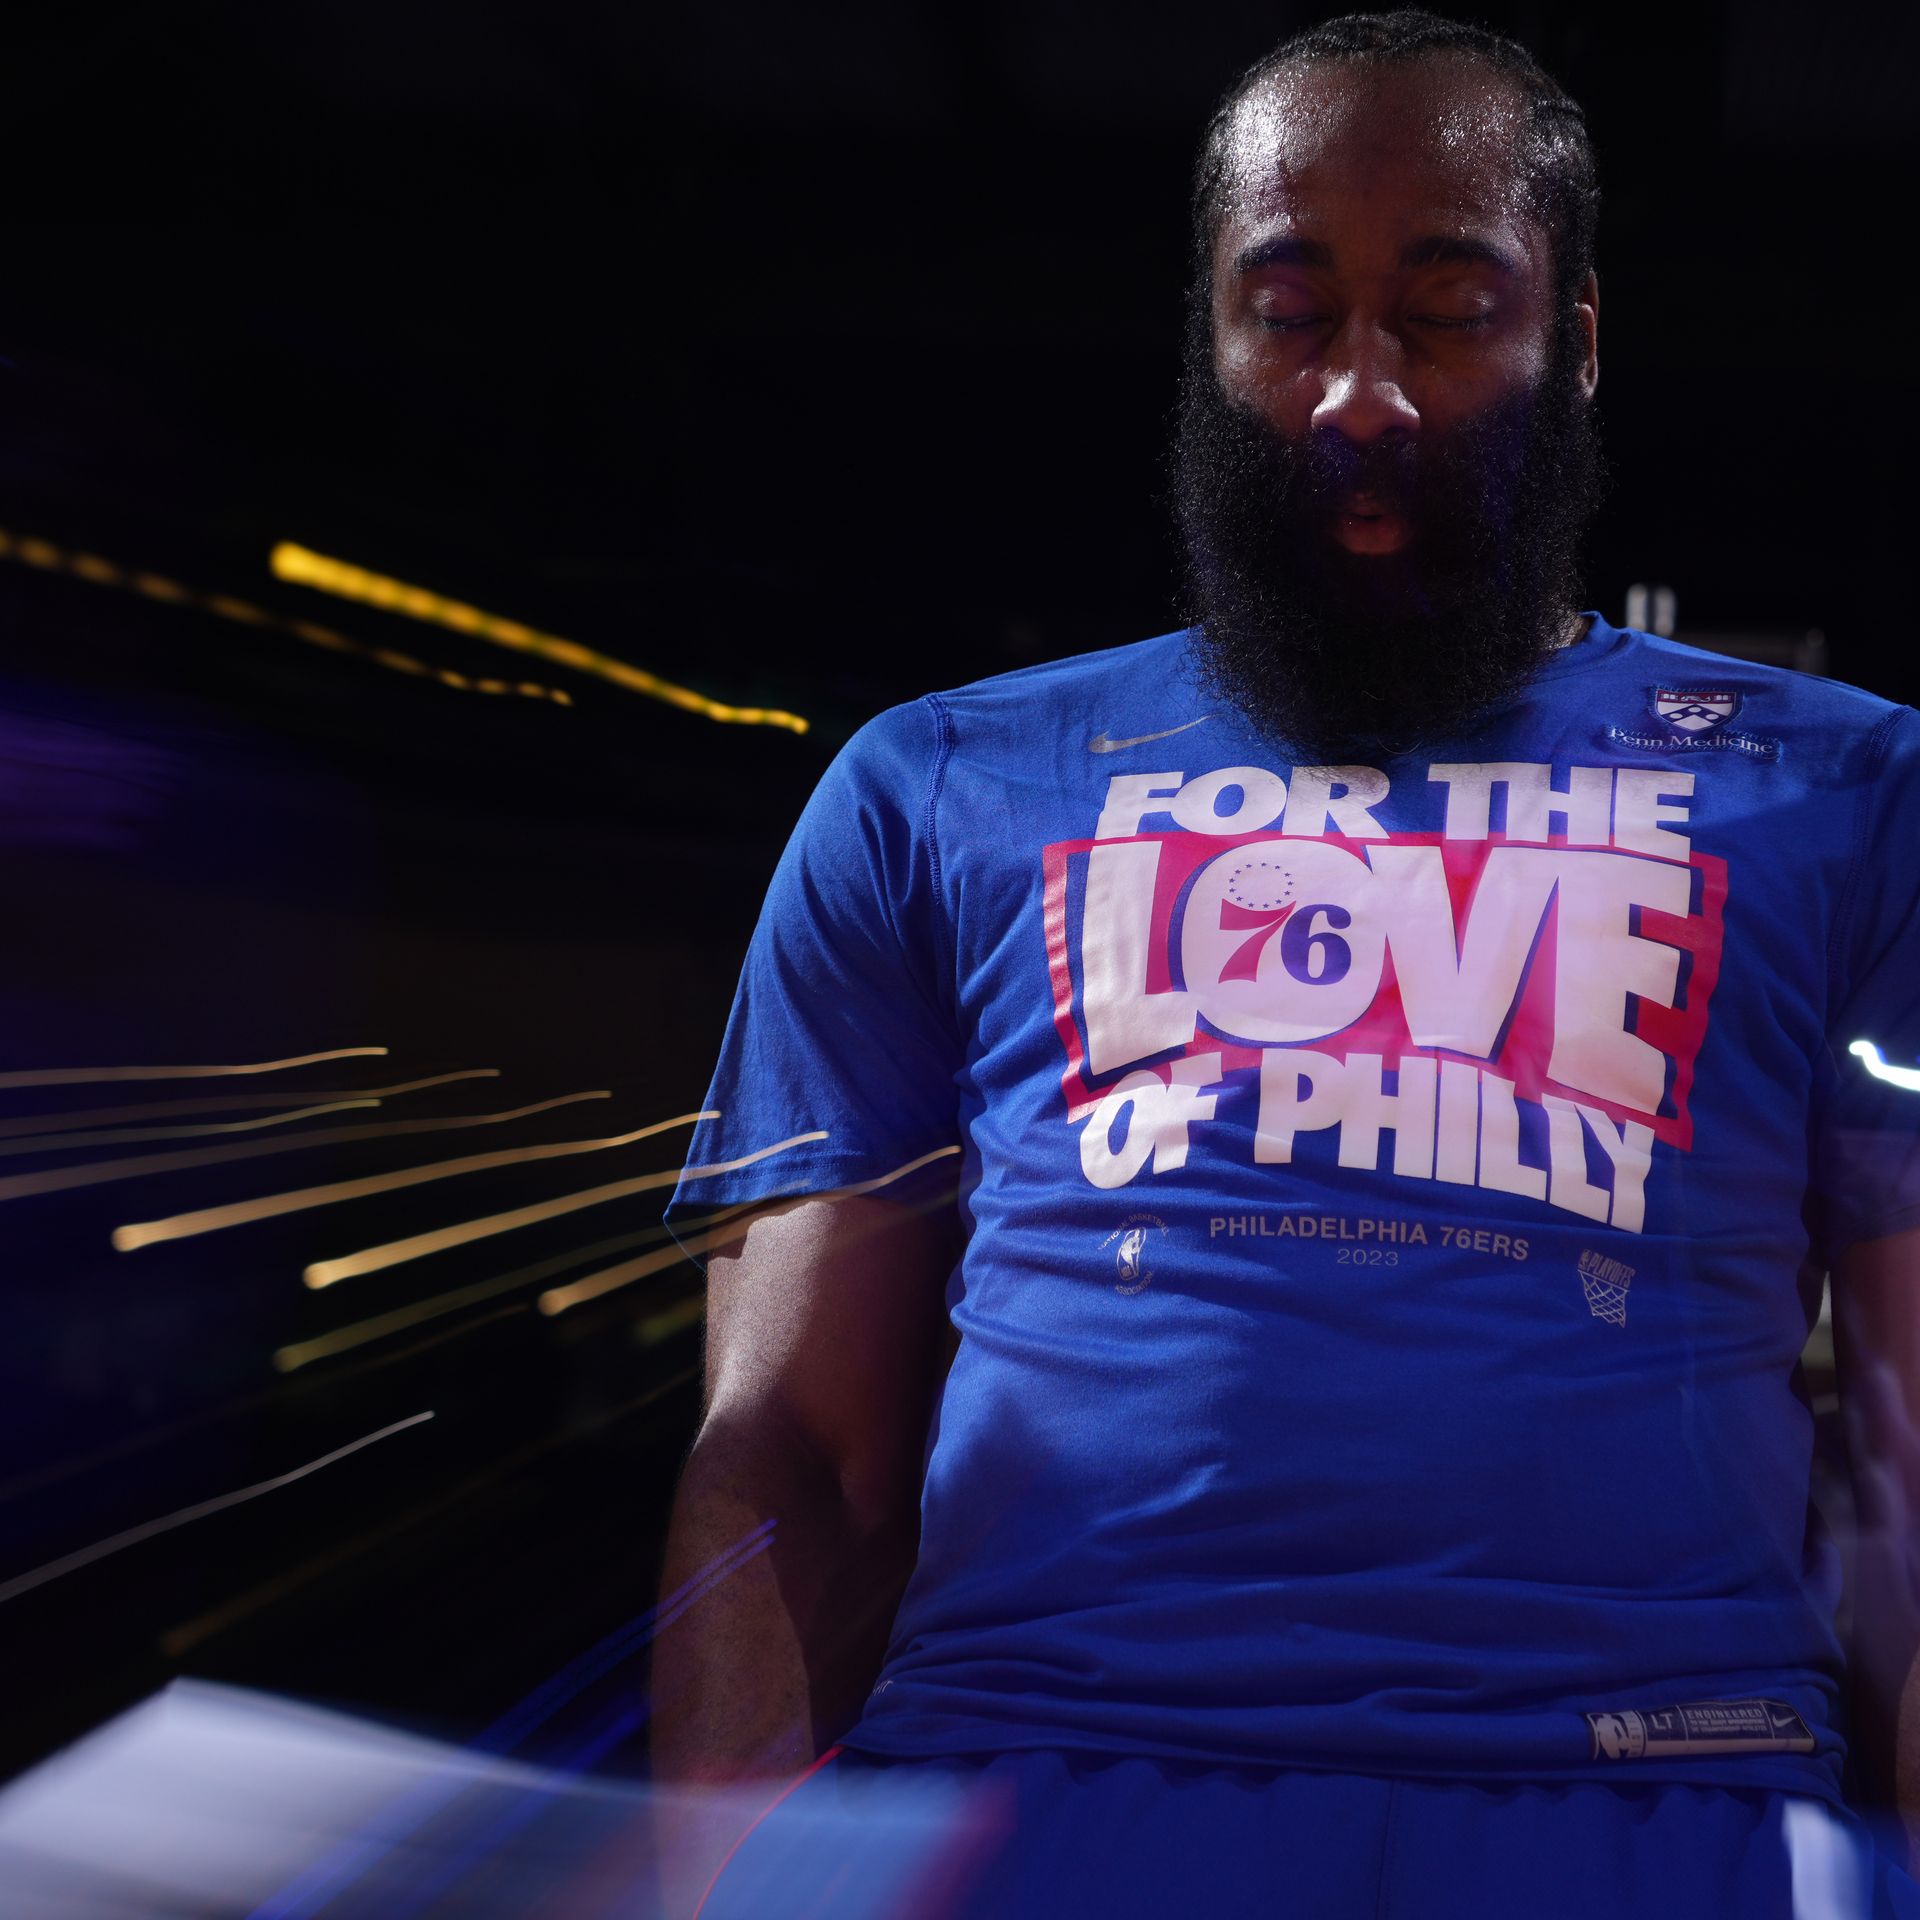 james harden philly jersey